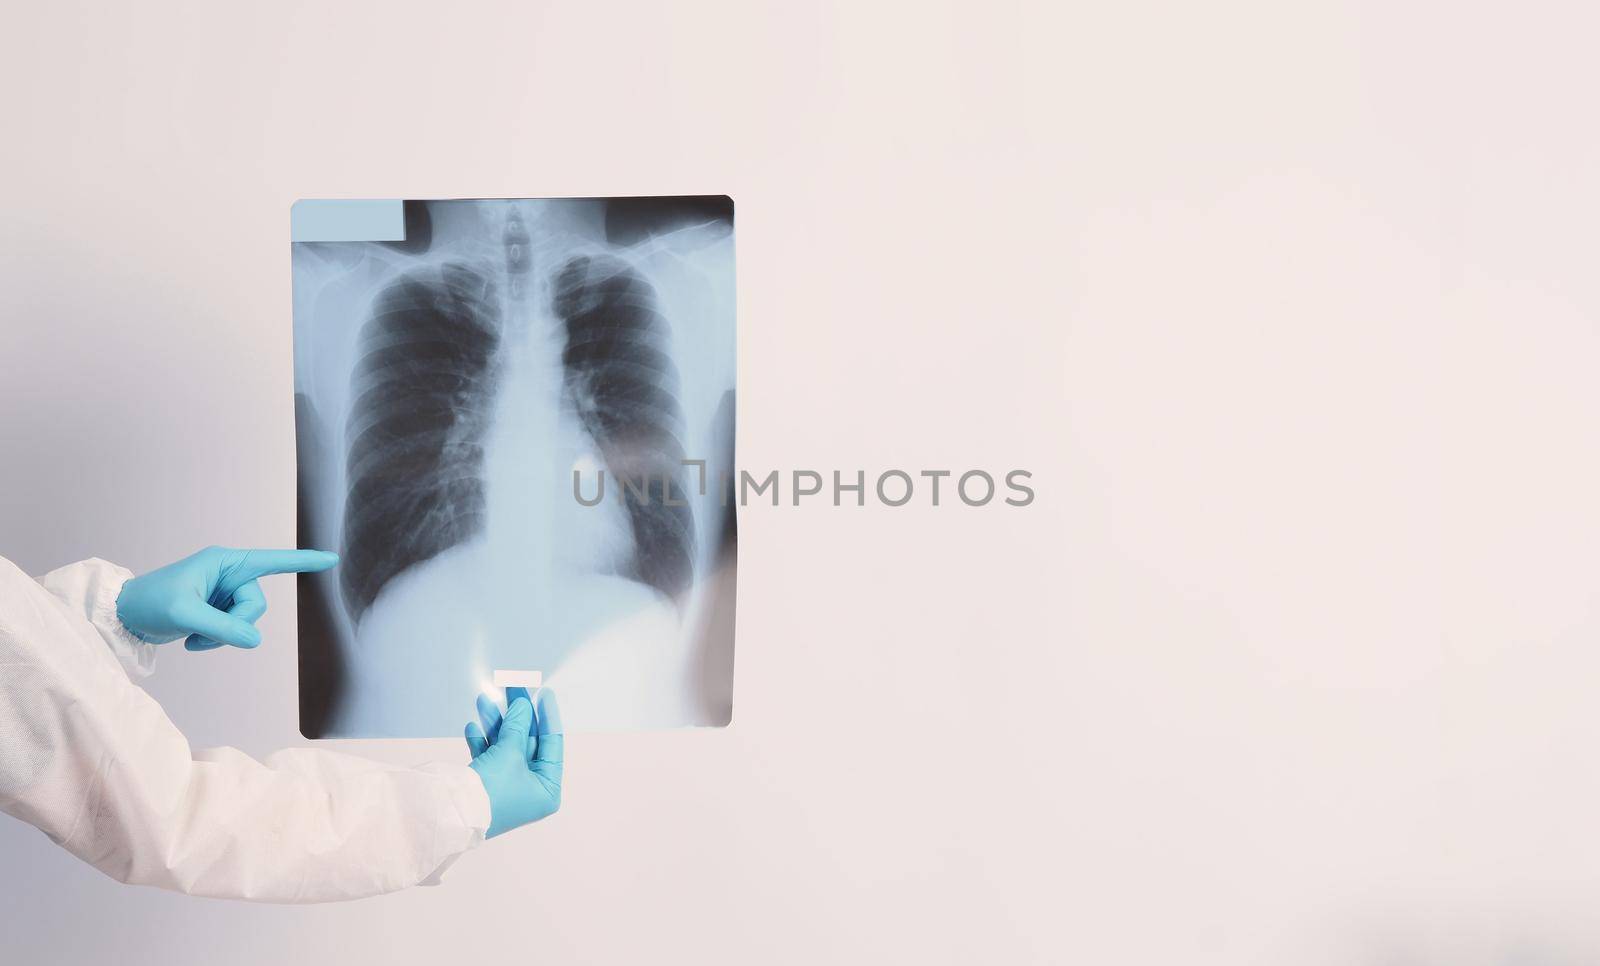 Xray film of Covid 19 lung damage and holding by doctor hand in medical glove and PPE by gnepphoto